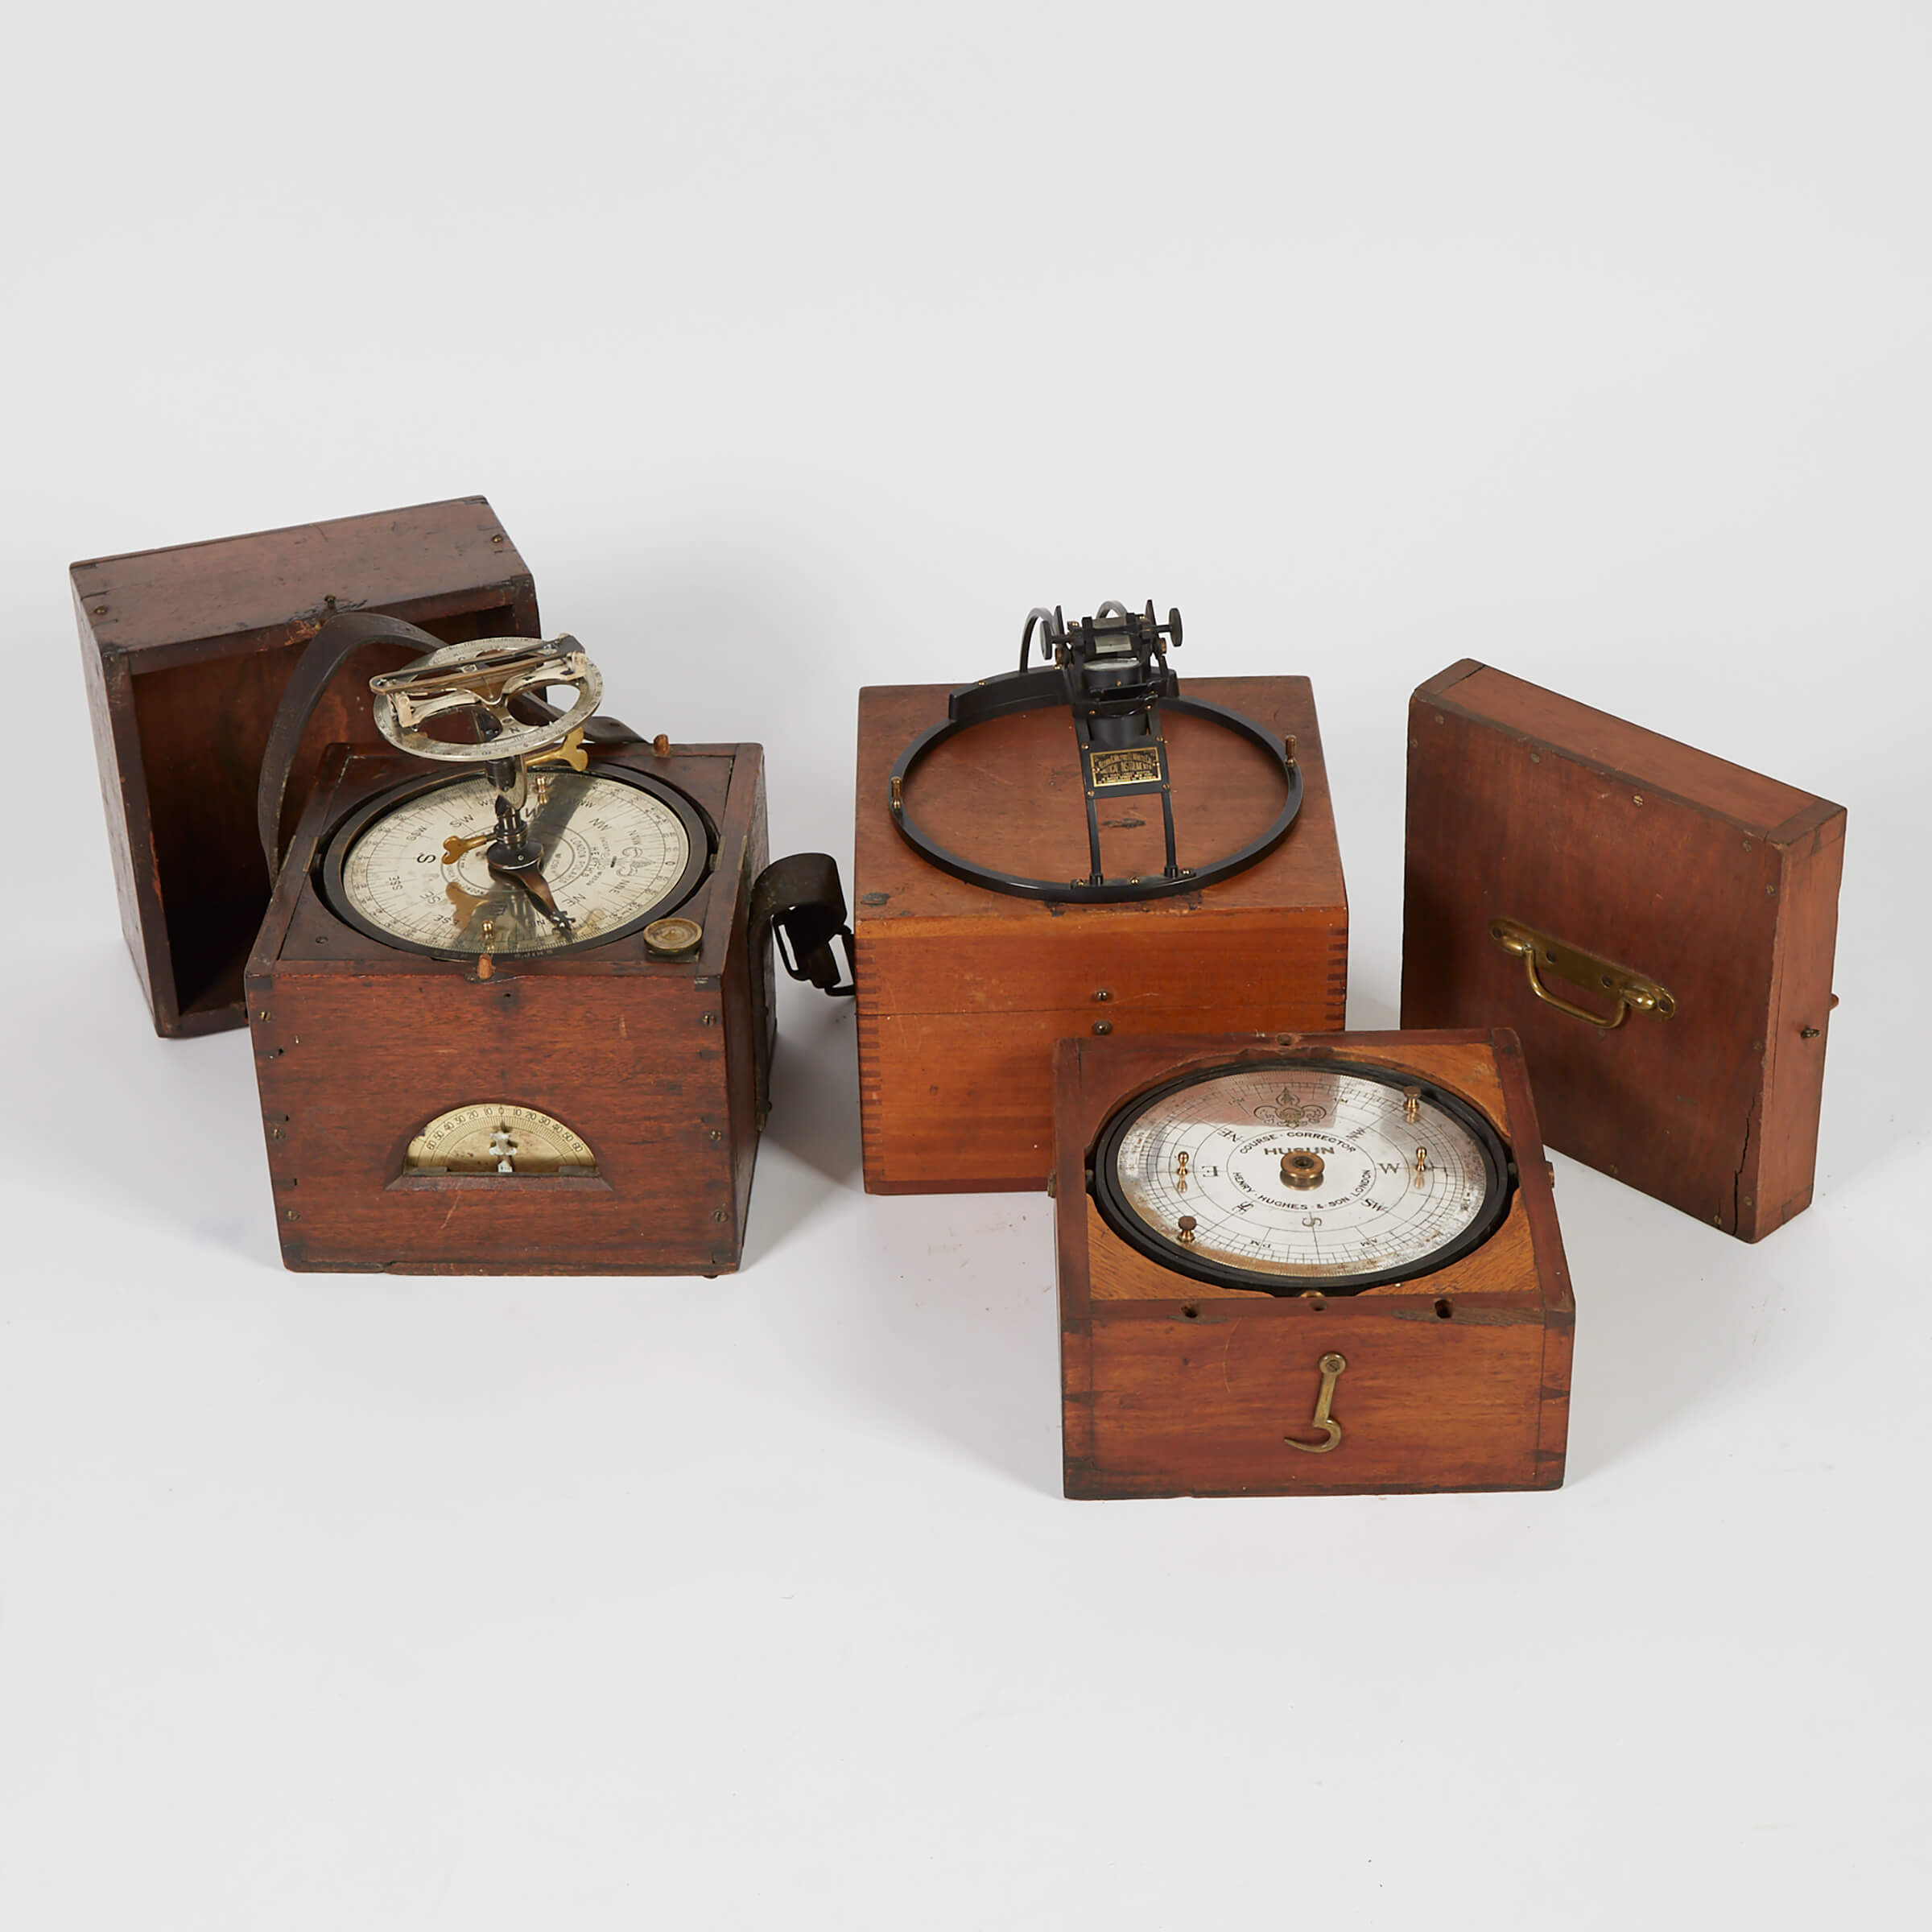 Three Cased Nautical Navigation Instruments, 19th/early 20th century